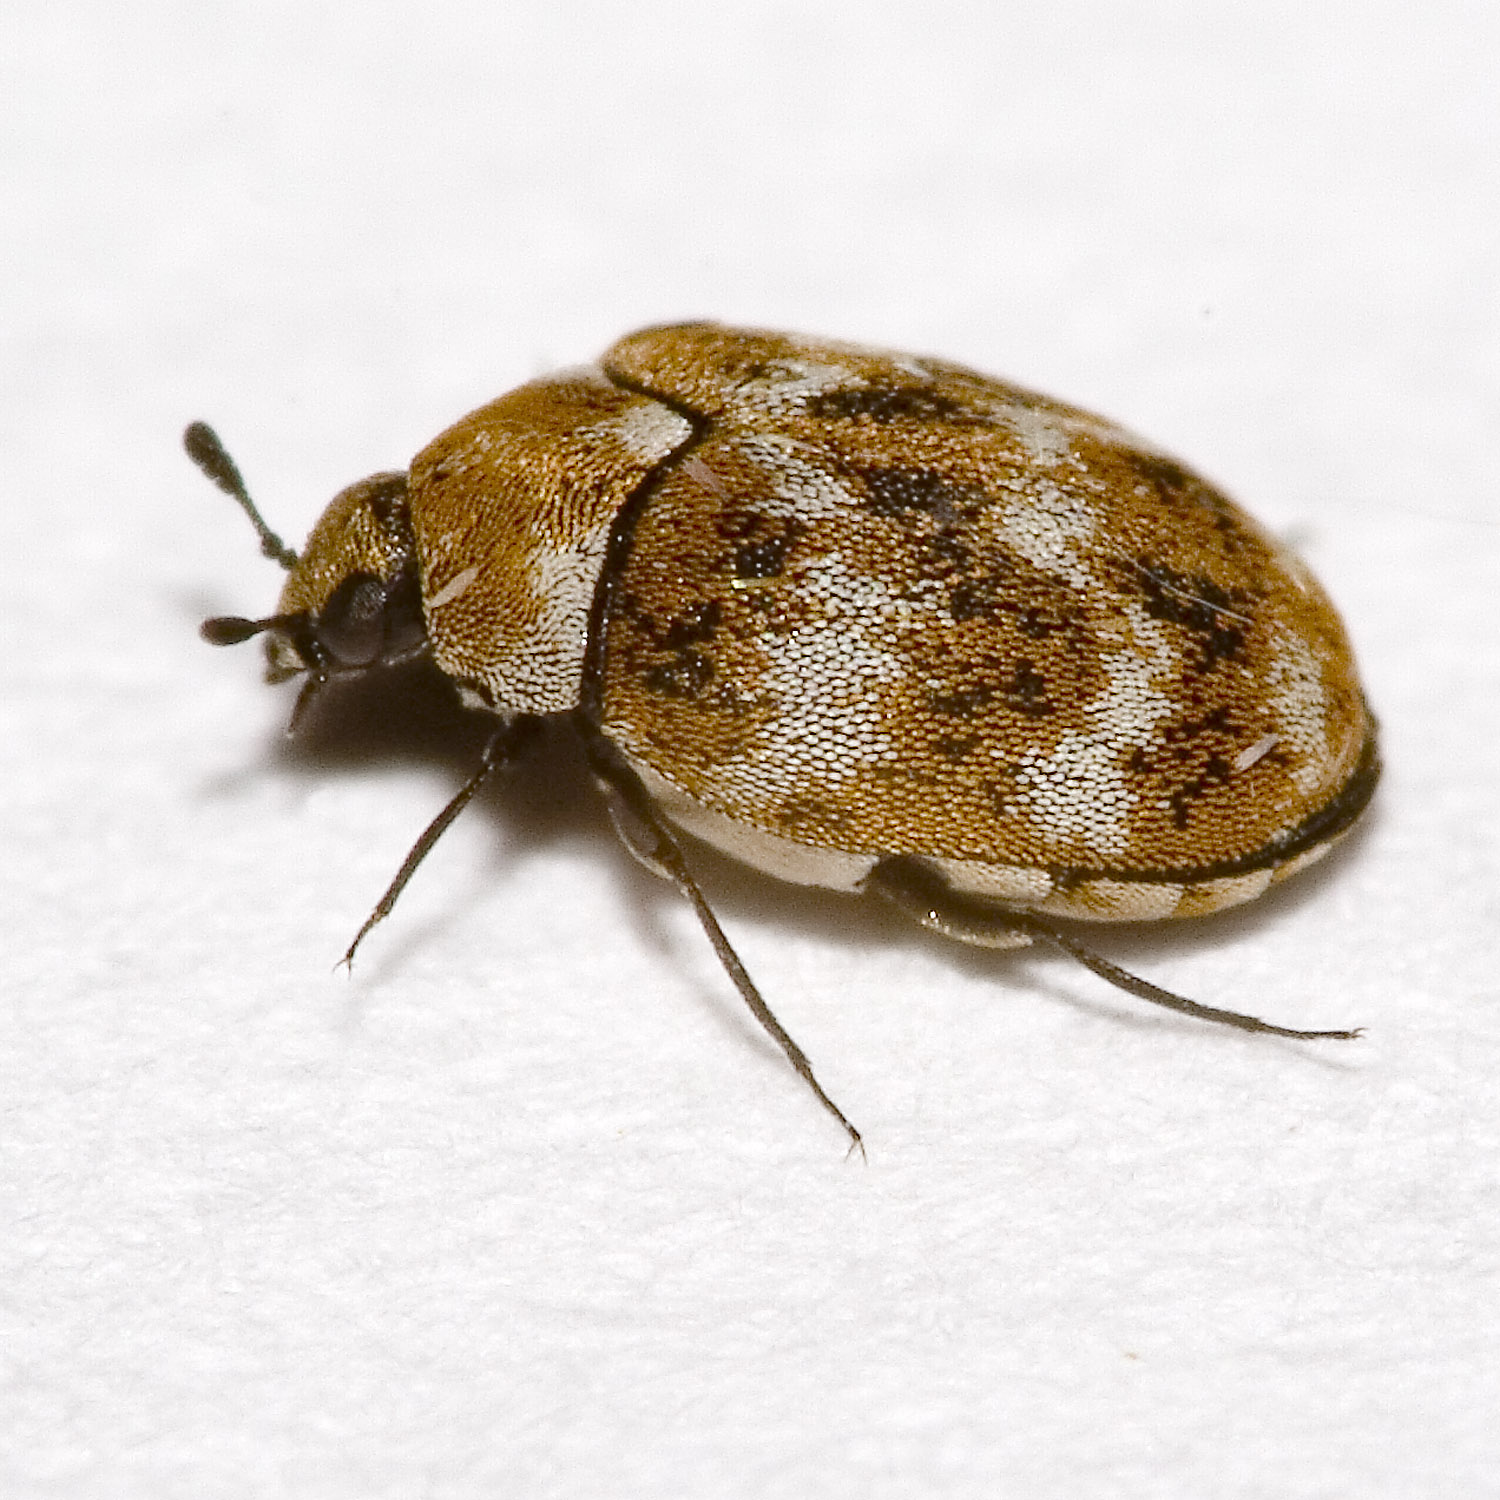 Behind the Scenes: The Guernsey Carpet Beetle. - Museum of the Order of